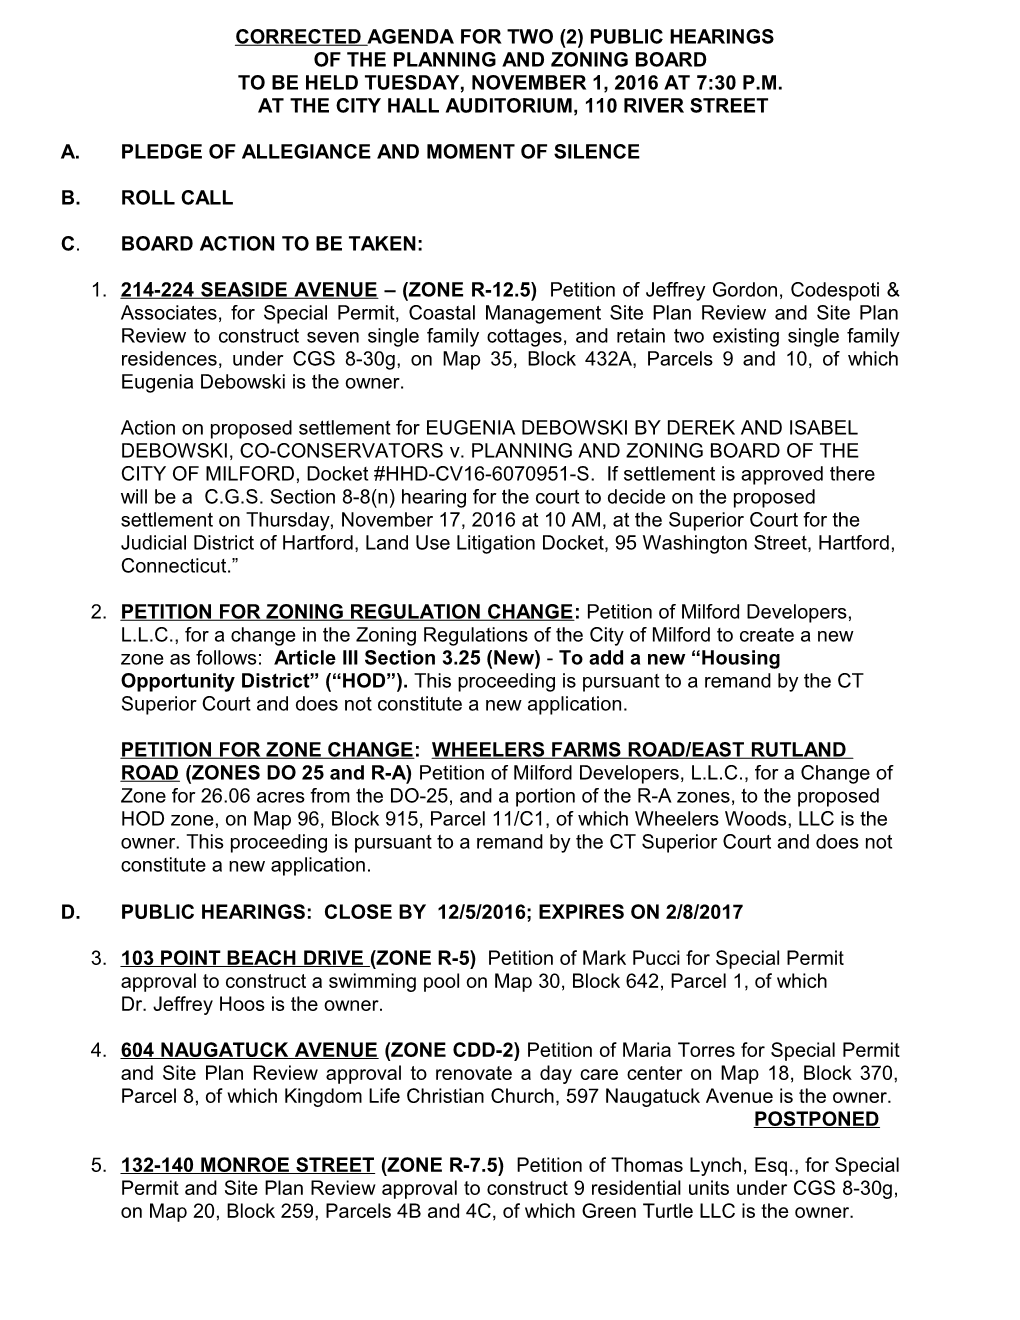 Corrected Agenda for Two (2) Public Hearings